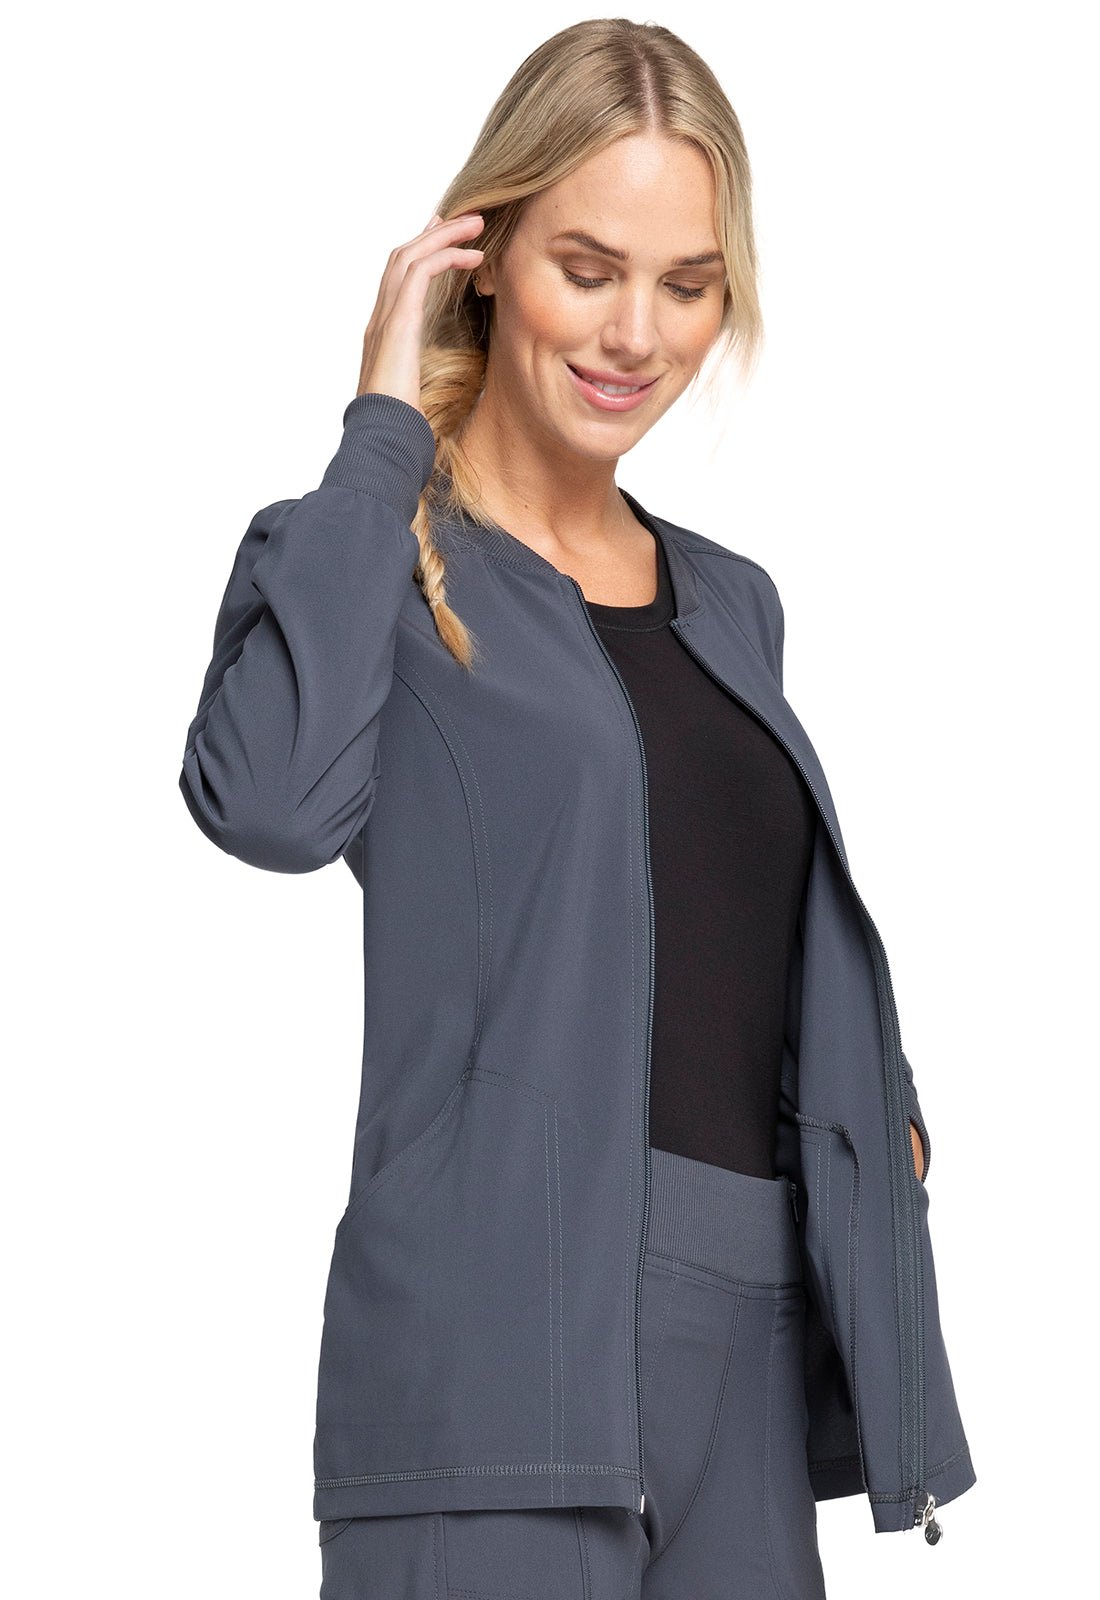 Pewter Cherokee Infinity Zip Front Scrub Jacket CK370A PWPS - Scrubs Select